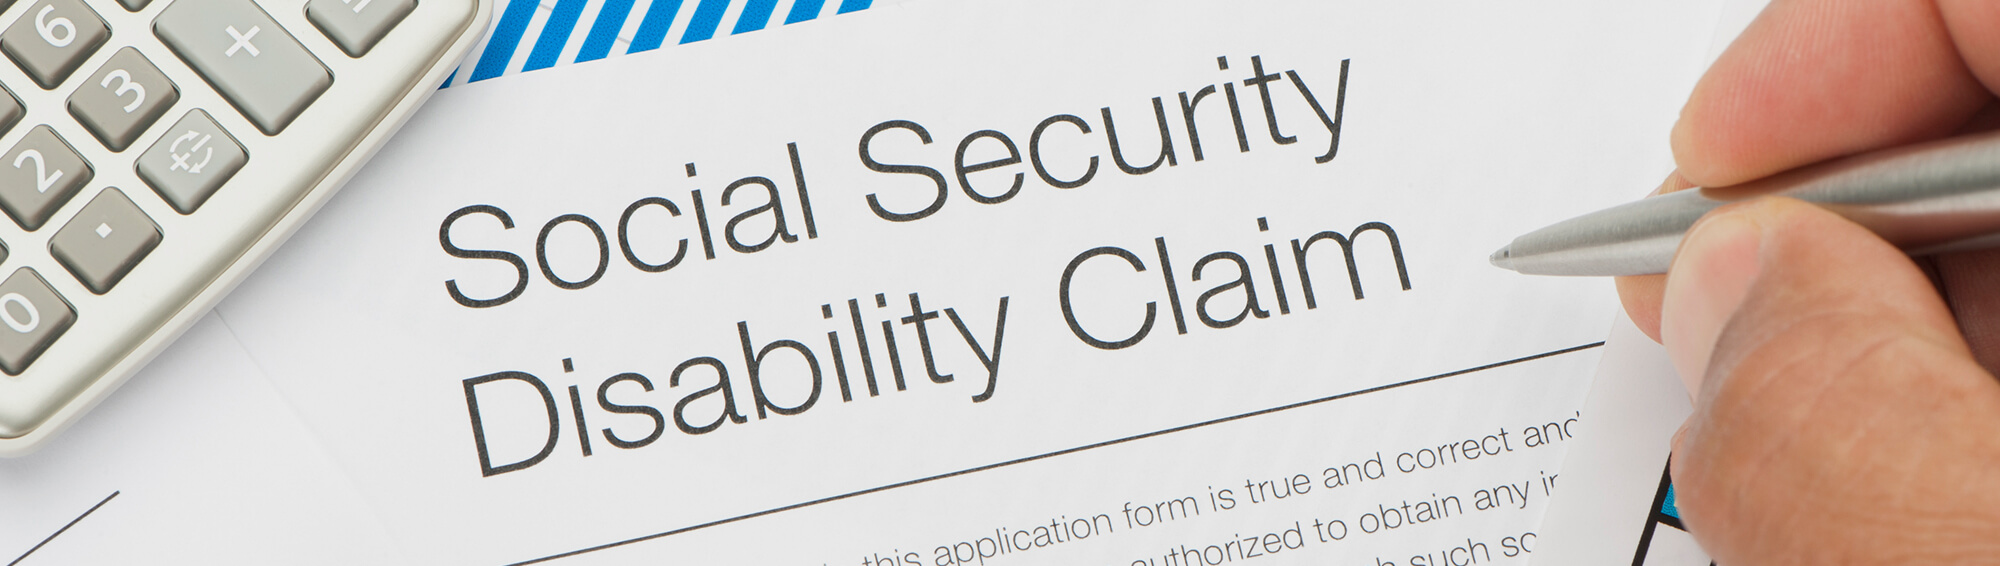 3 Reasons Social Security Disability Claims Are Denied